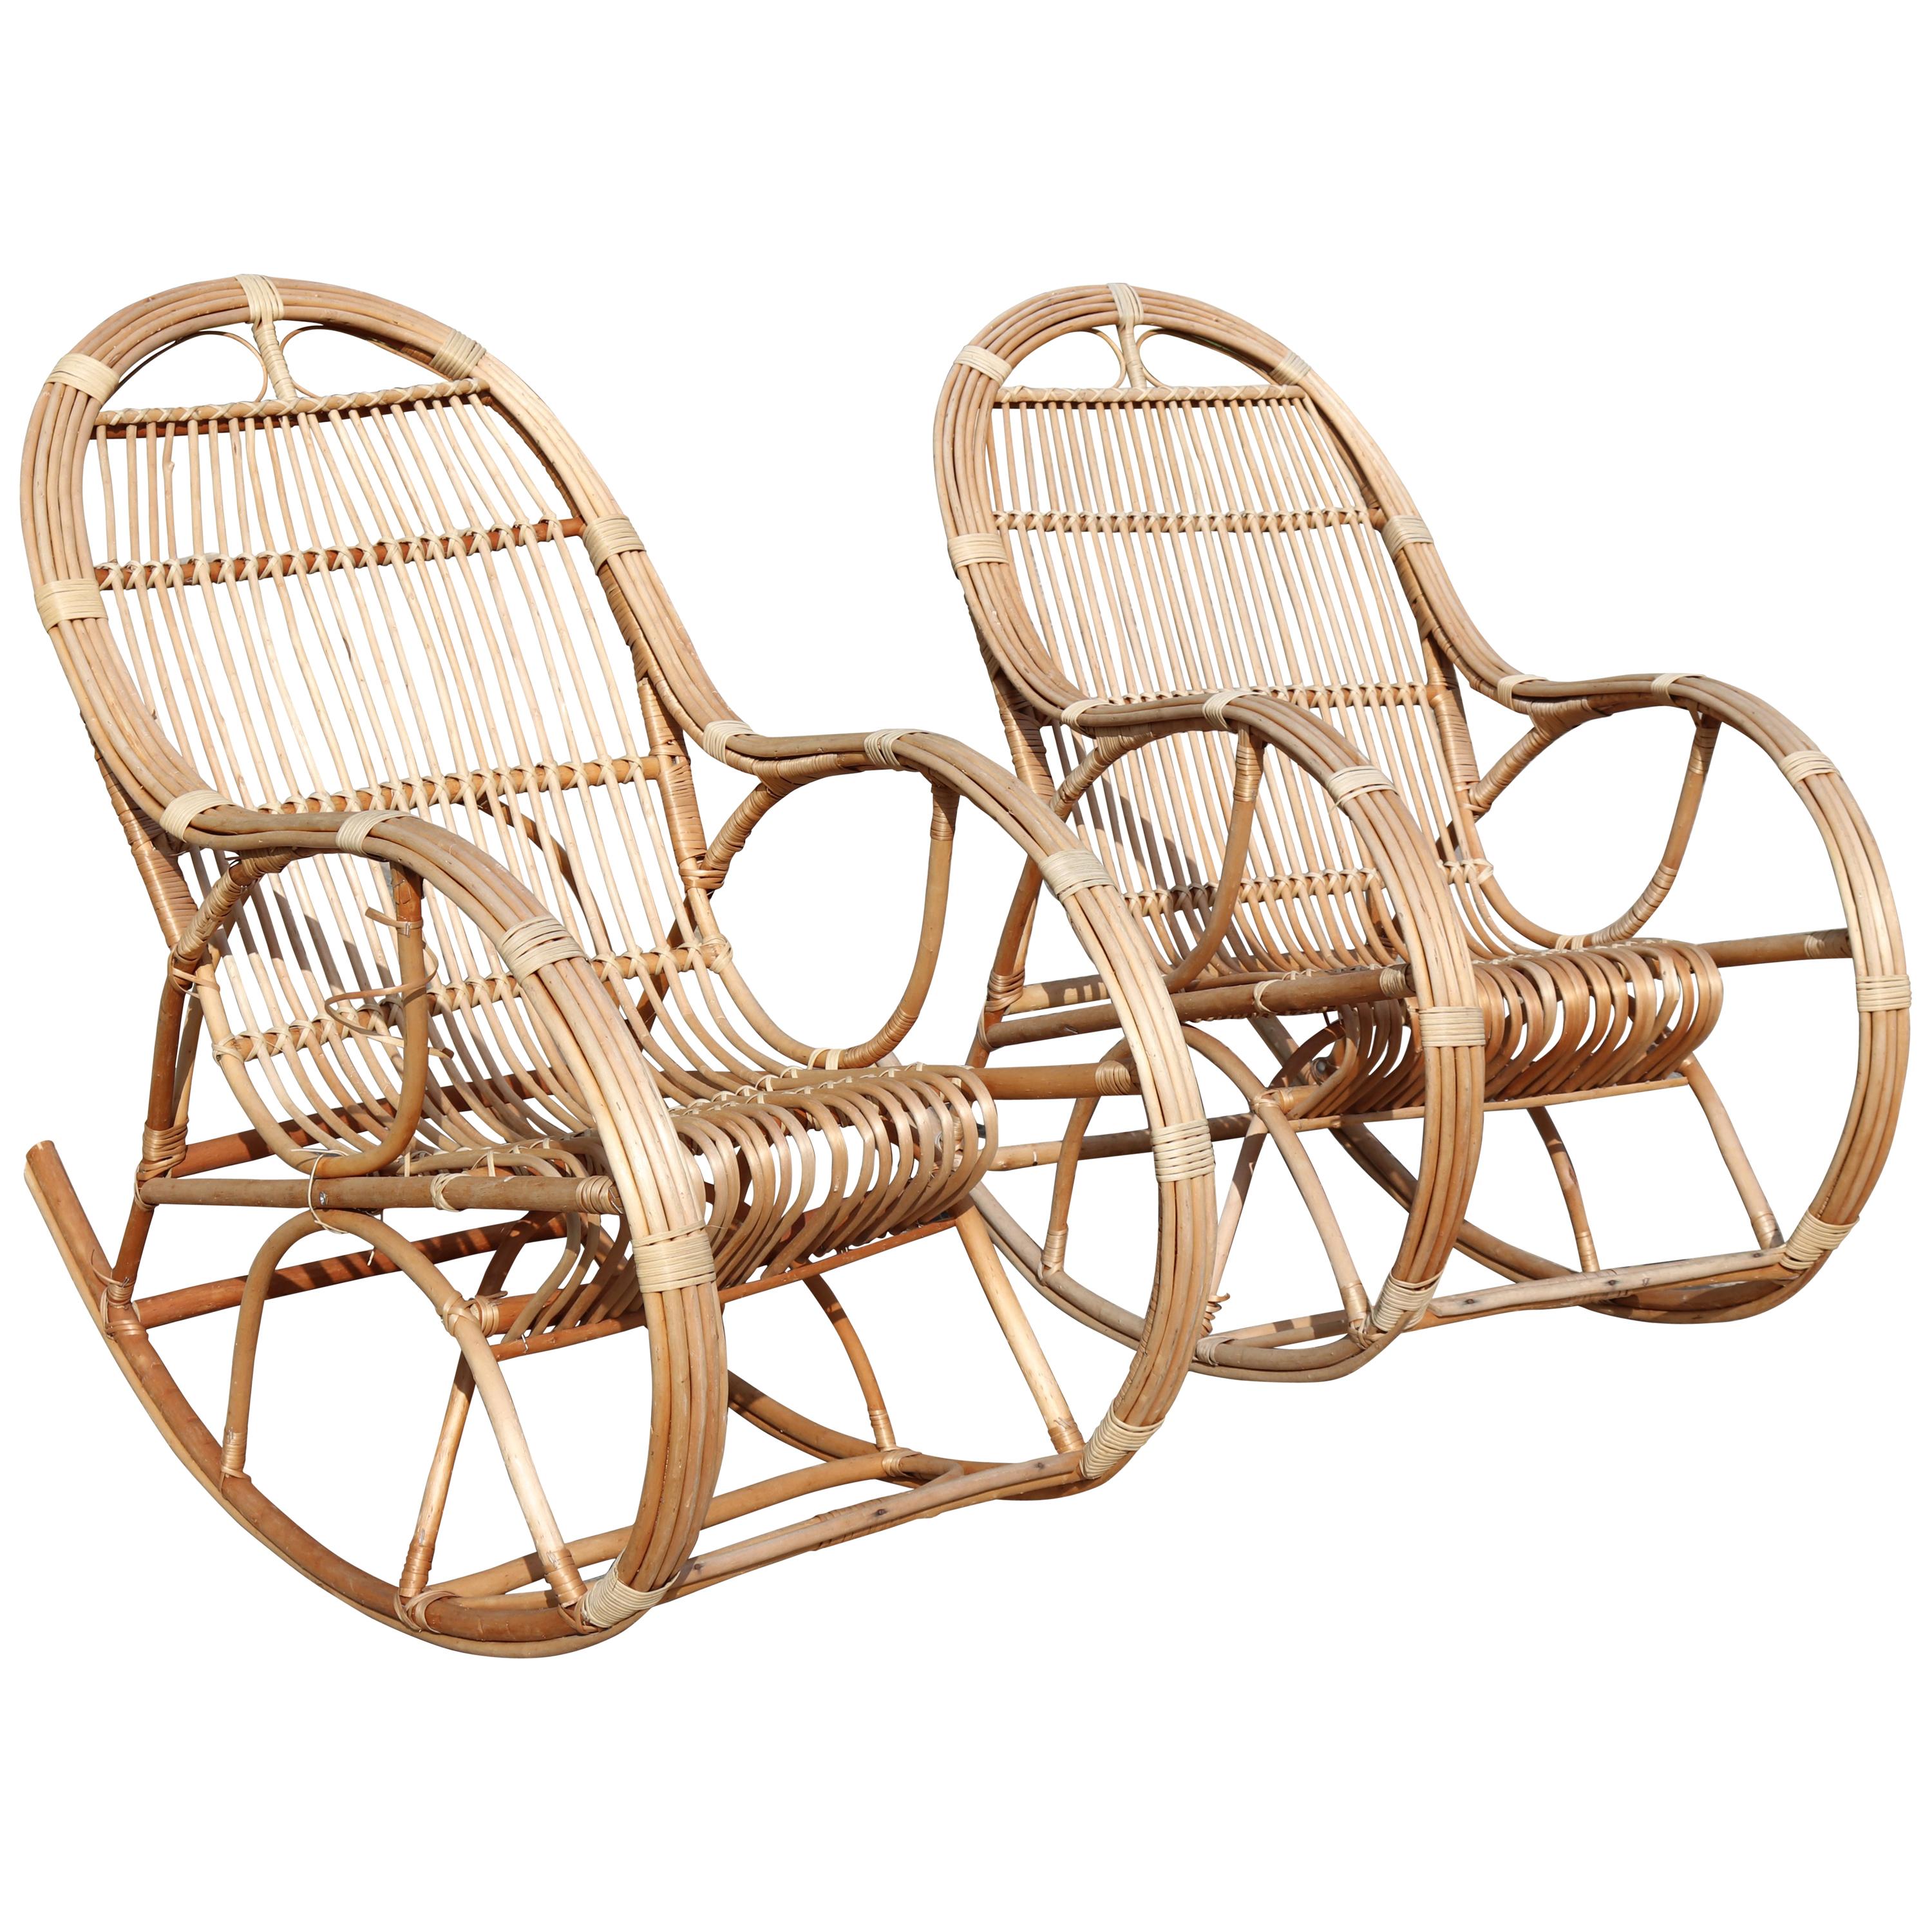 1970s Pair of Spanish Bamboo and Willow Wicker Rocking Chairs